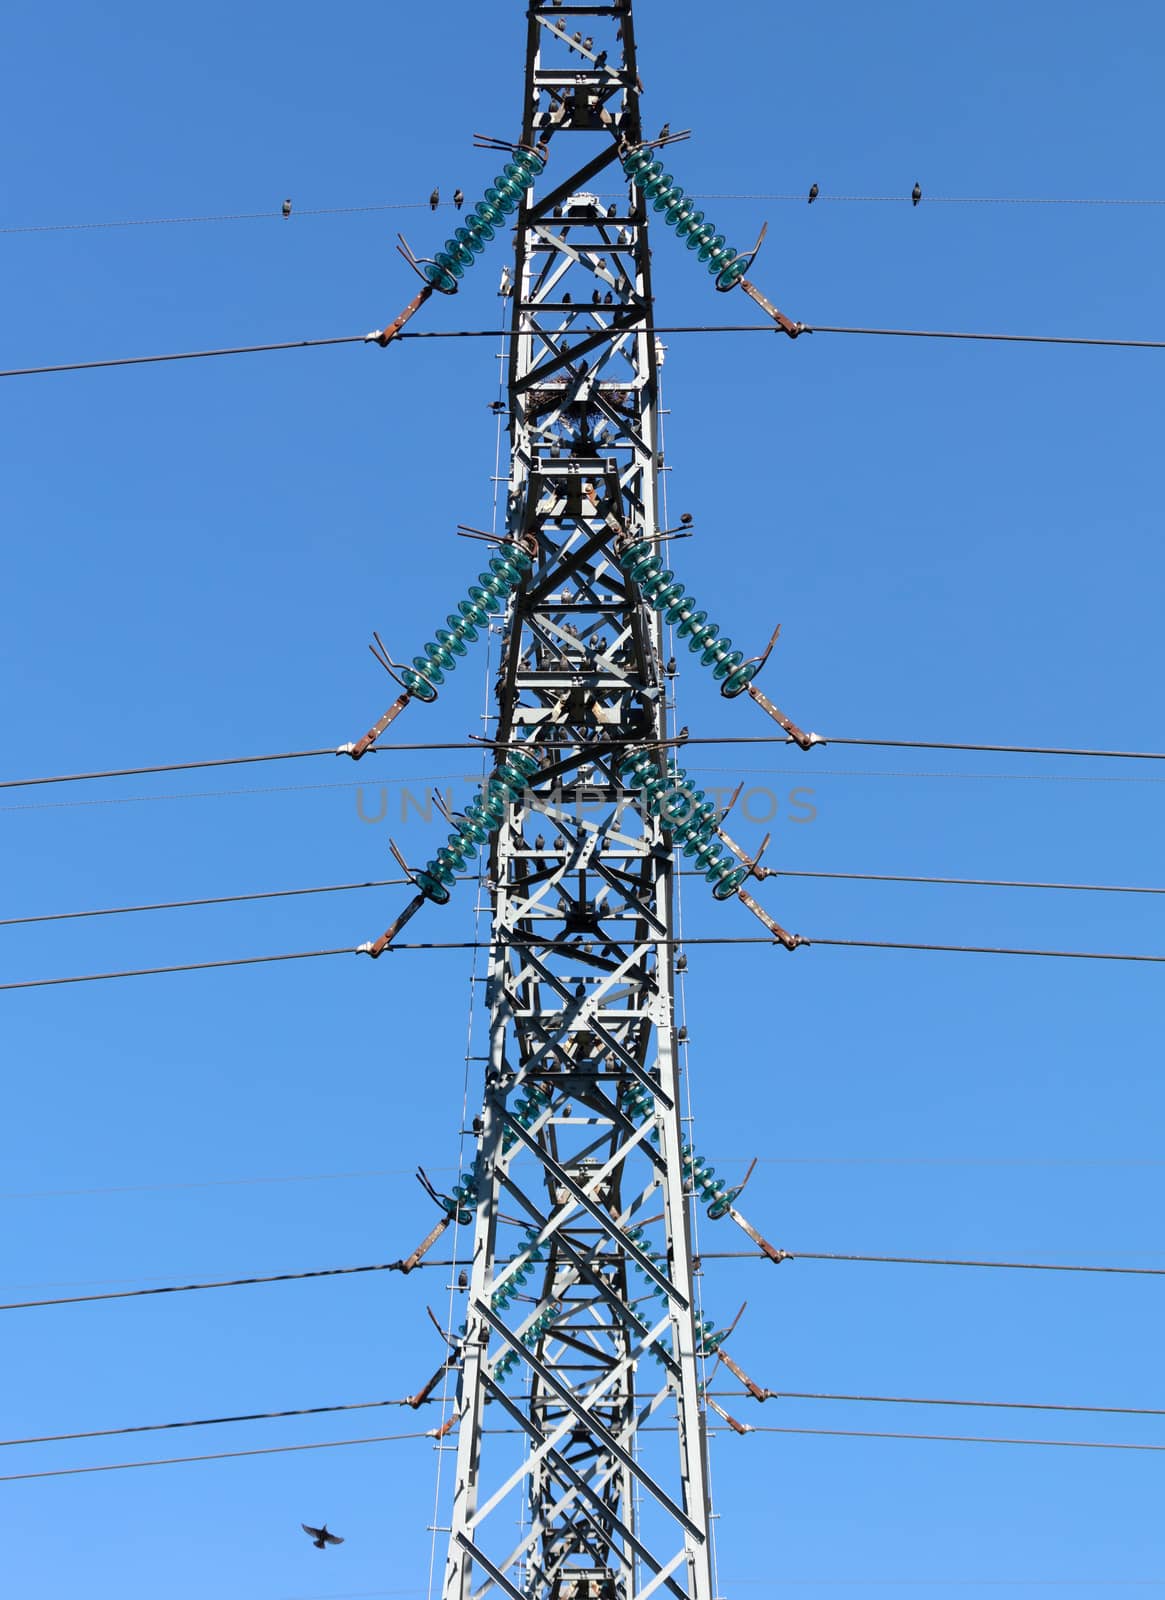 Energetic pylon with a lot of starlings, the Netherlands